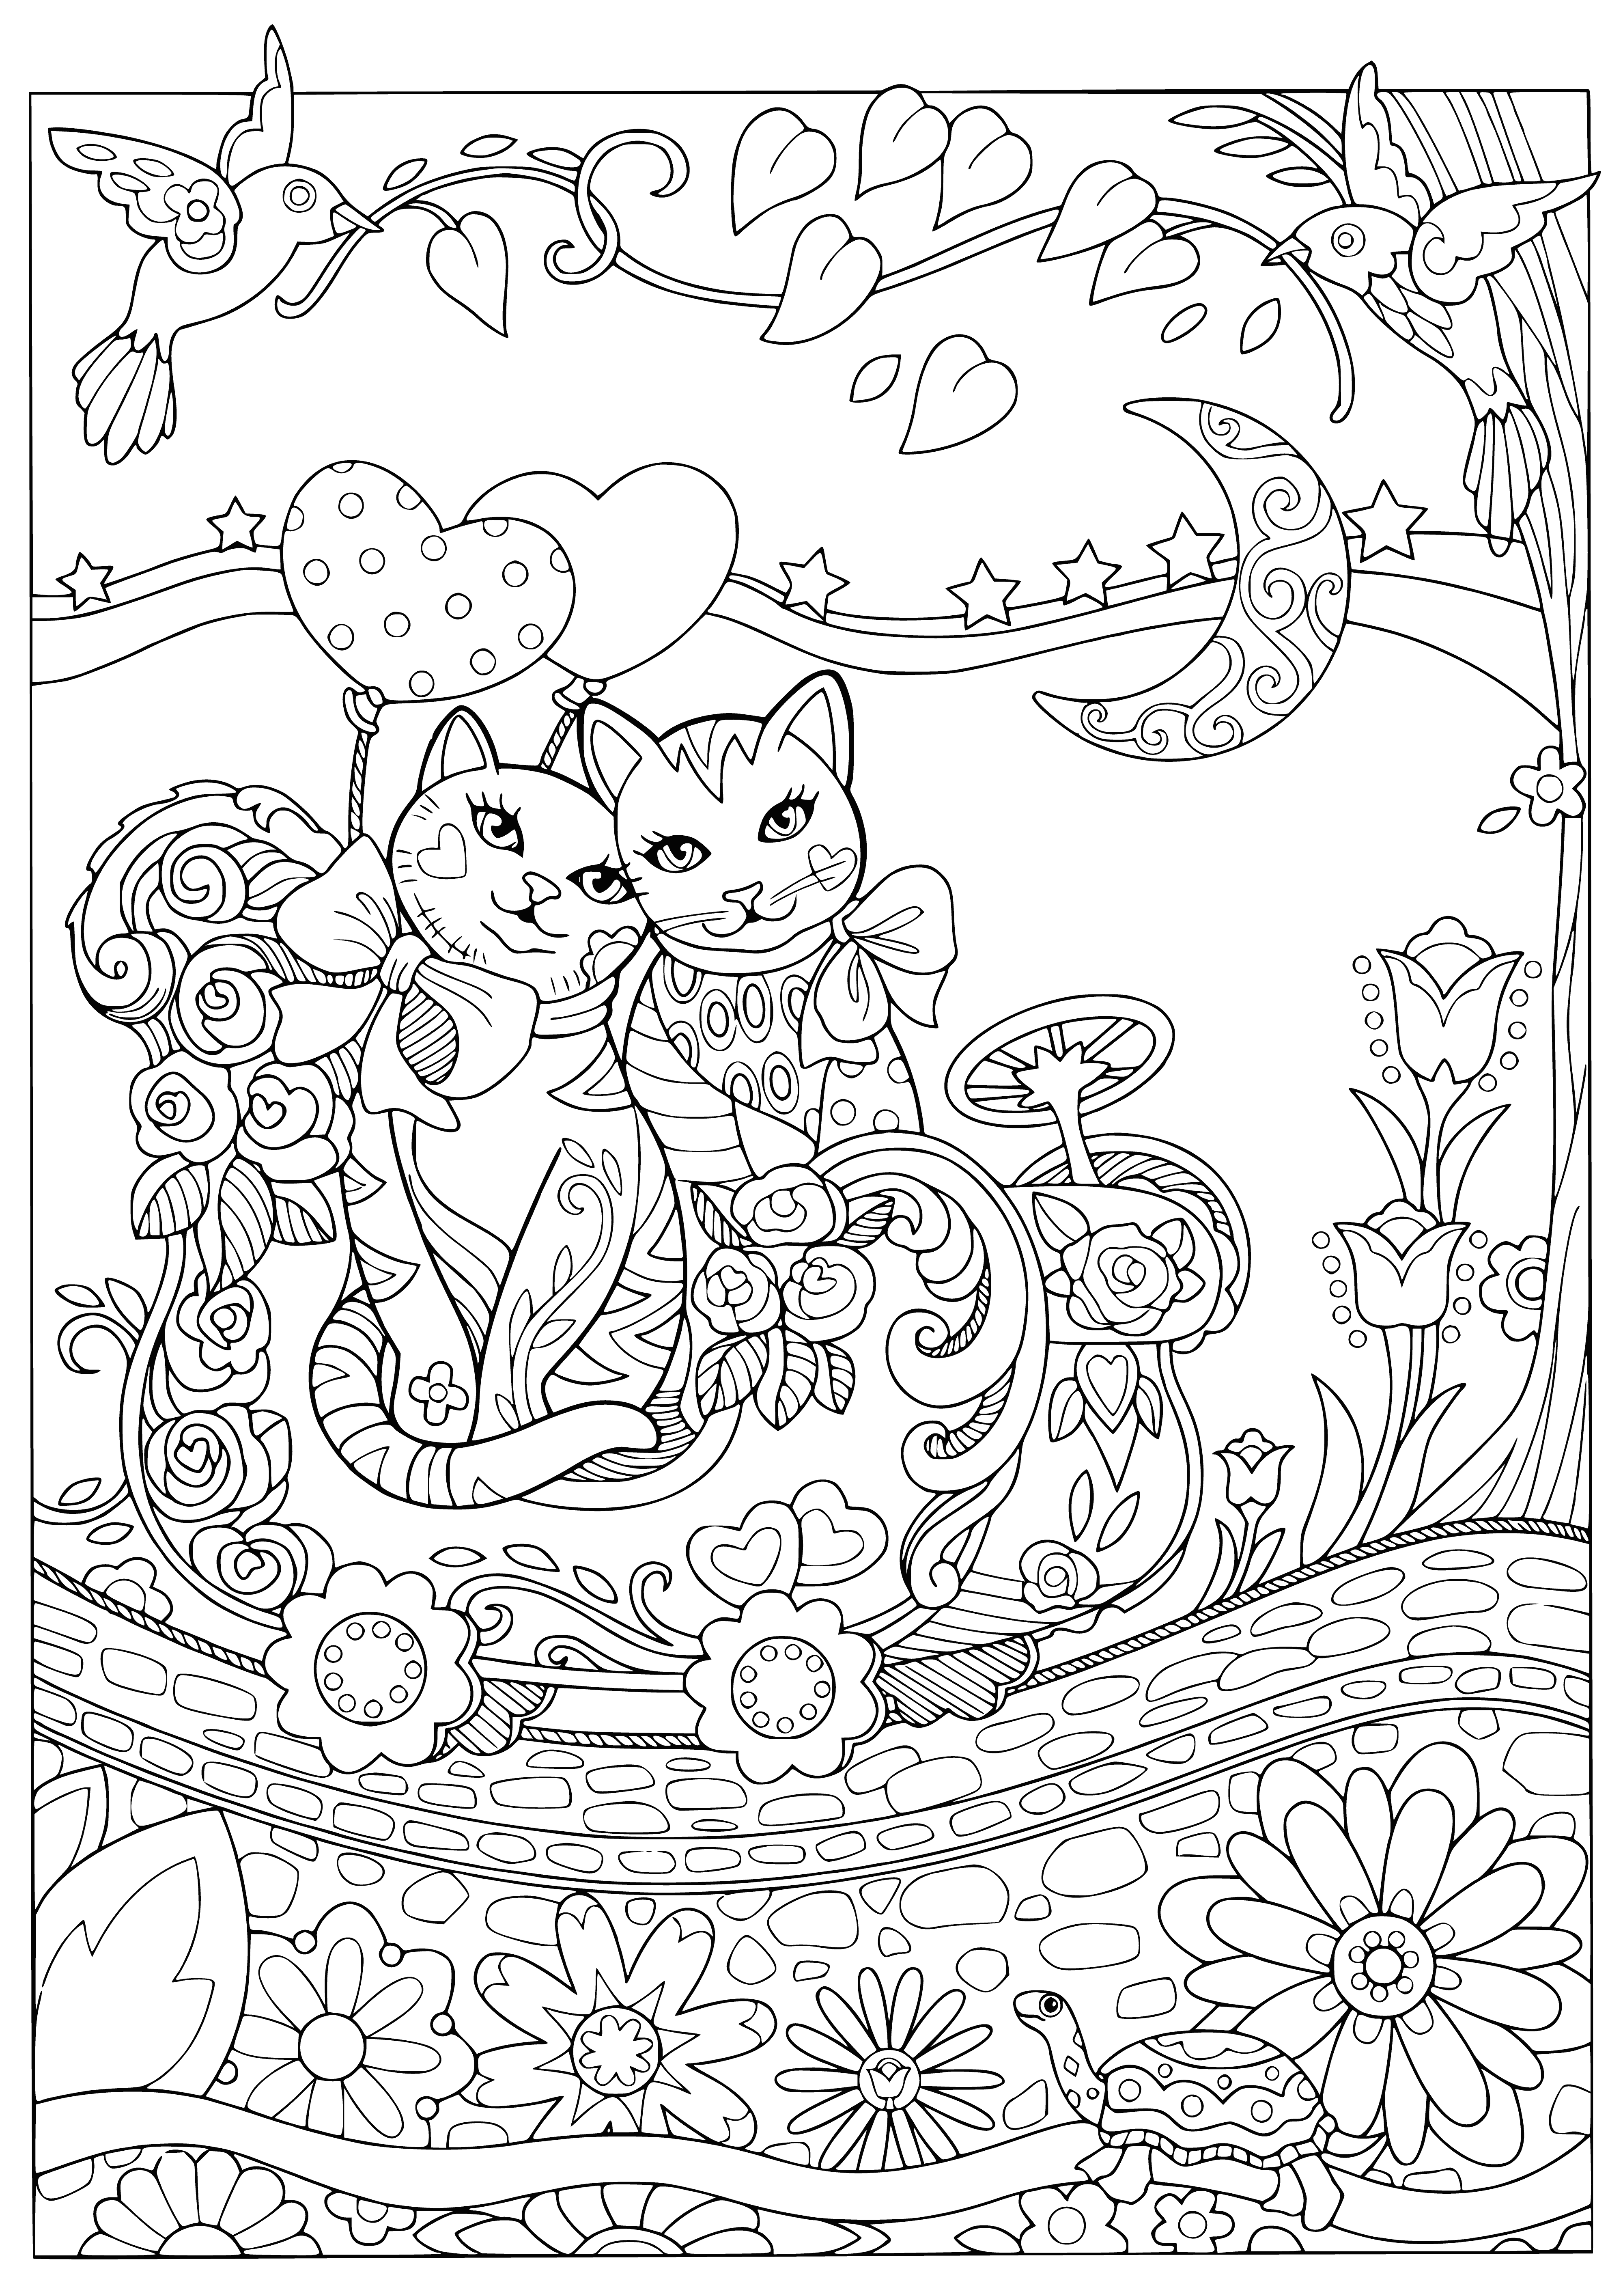 coloring page: Woman walking two cats on leashes. Grey and brown. Woman wears blue dress and scarf w/ black shoes.